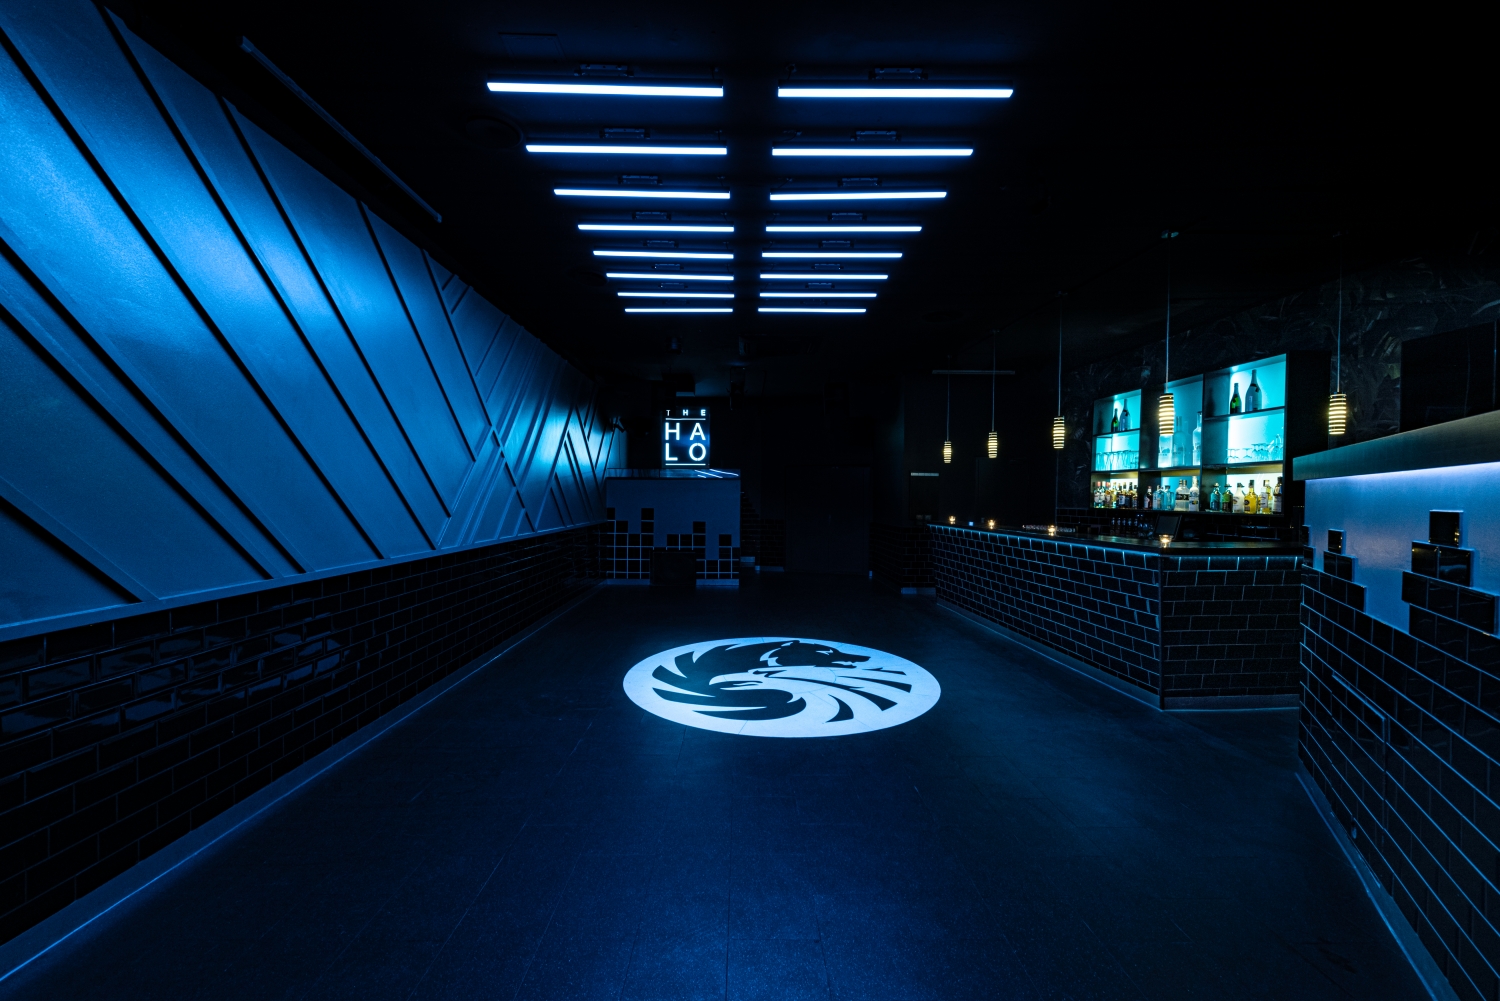 UPPER HALO Bar and Dancefloor with urban design elements such as bricks and some nice contemporary patterns on the walls add nice detail to the hip-hop area.